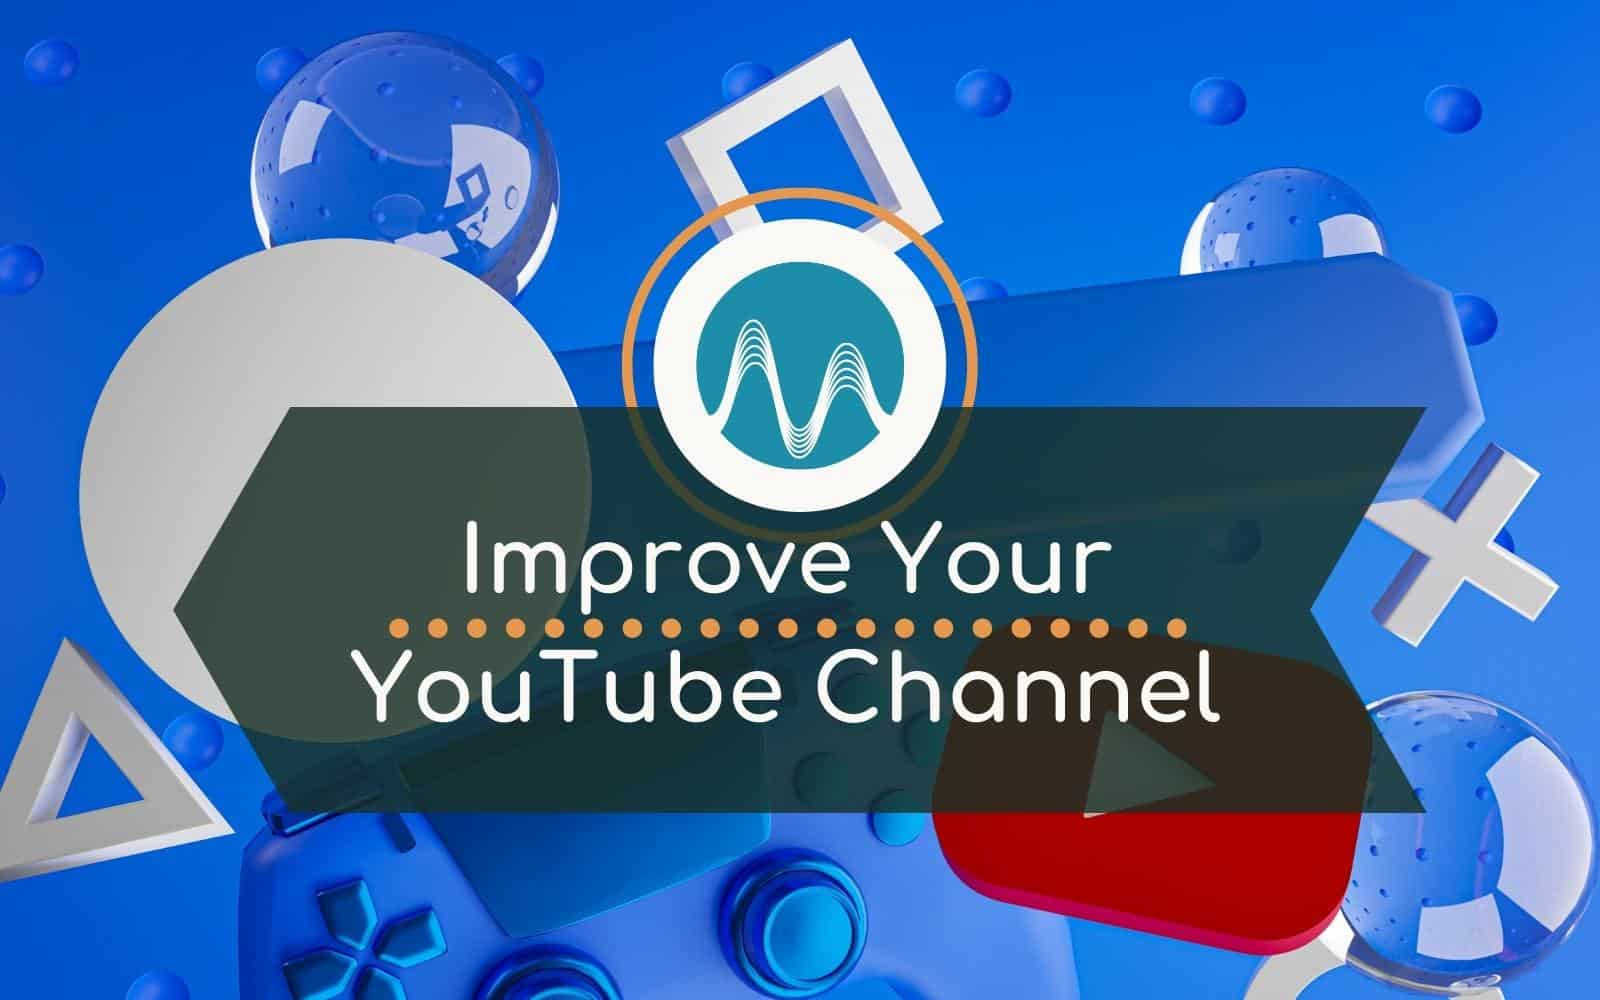 How Great Audio Can Improve Your YouTube Channel Audio Editing improve YouTube channel Music Radio Creative